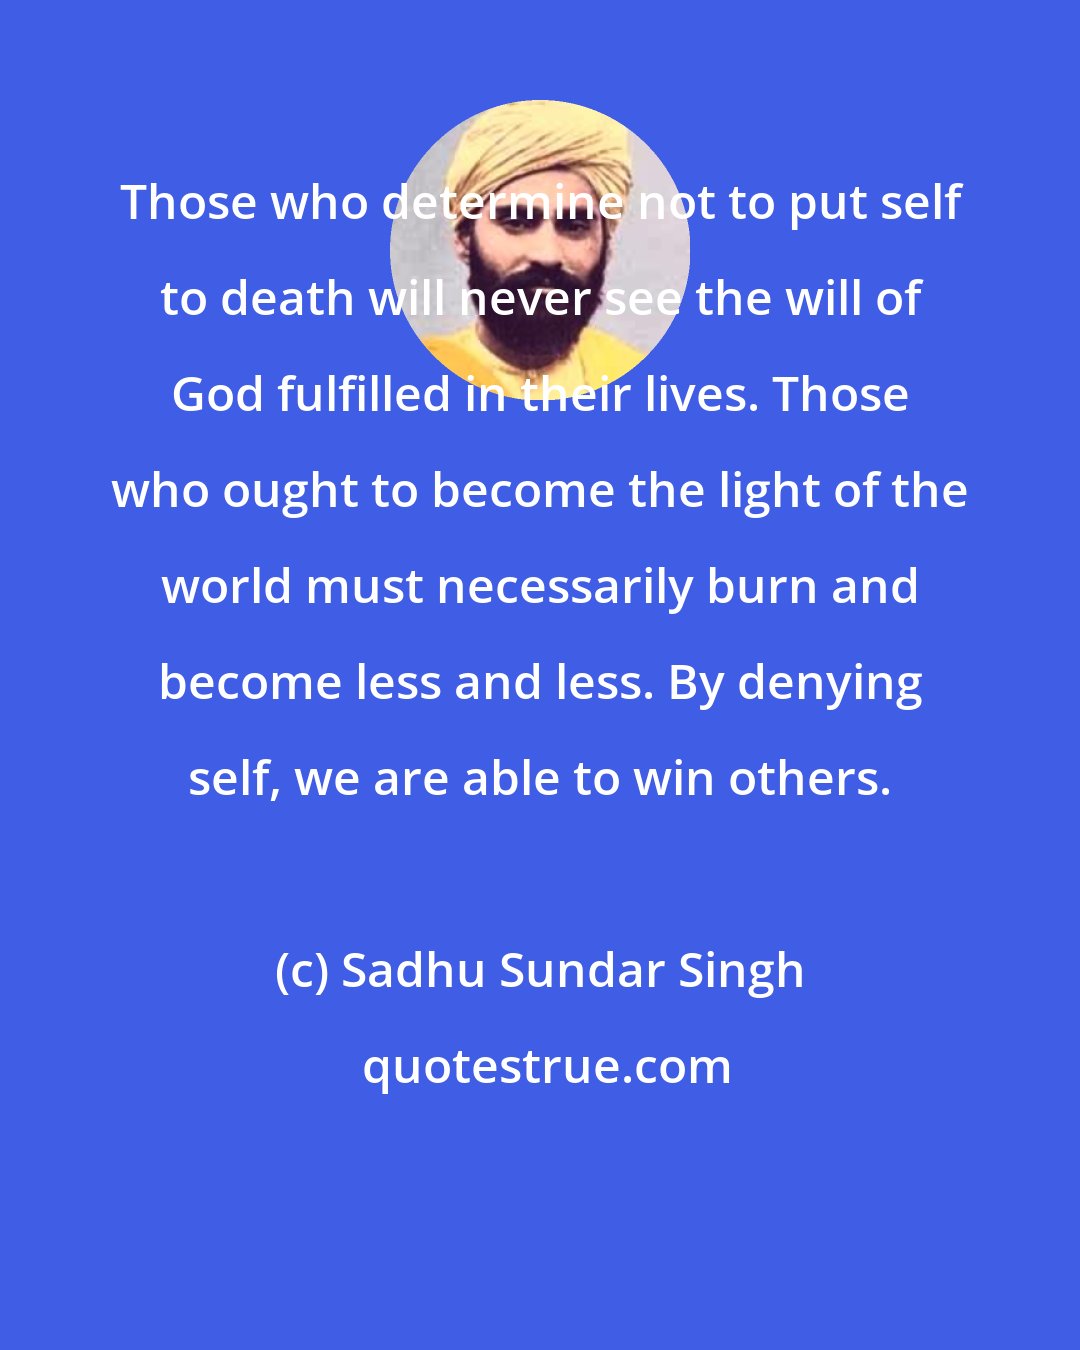 Sadhu Sundar Singh: Those who determine not to put self to death will never see the will of God fulfilled in their lives. Those who ought to become the light of the world must necessarily burn and become less and less. By denying self, we are able to win others.